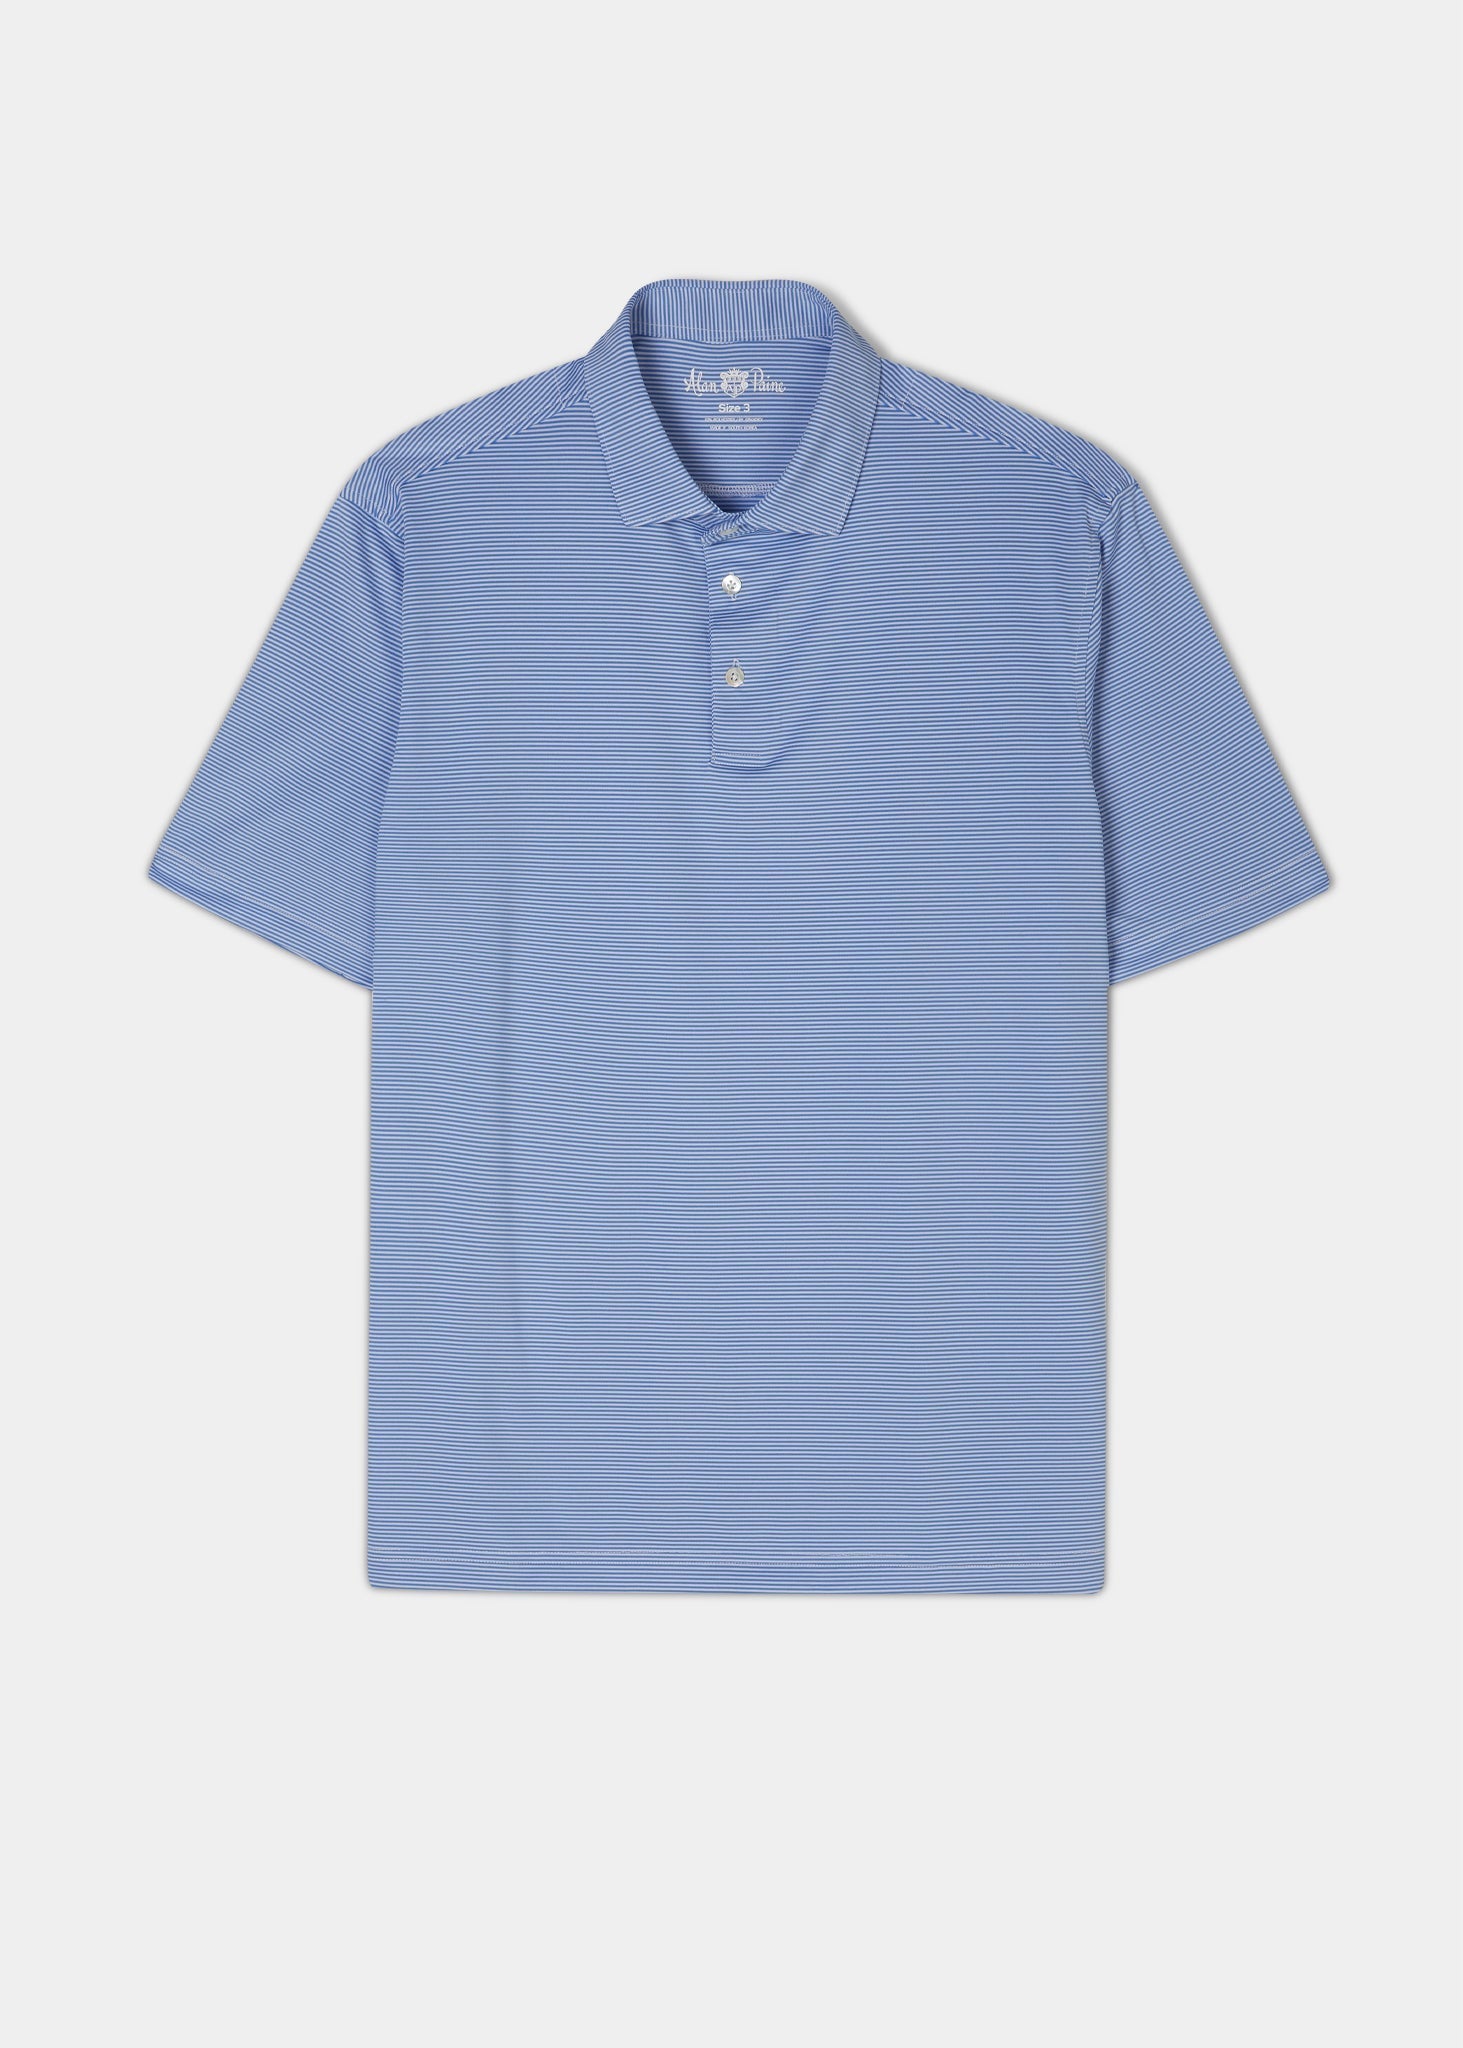 Striped short sleeved polo shirt in mid blue